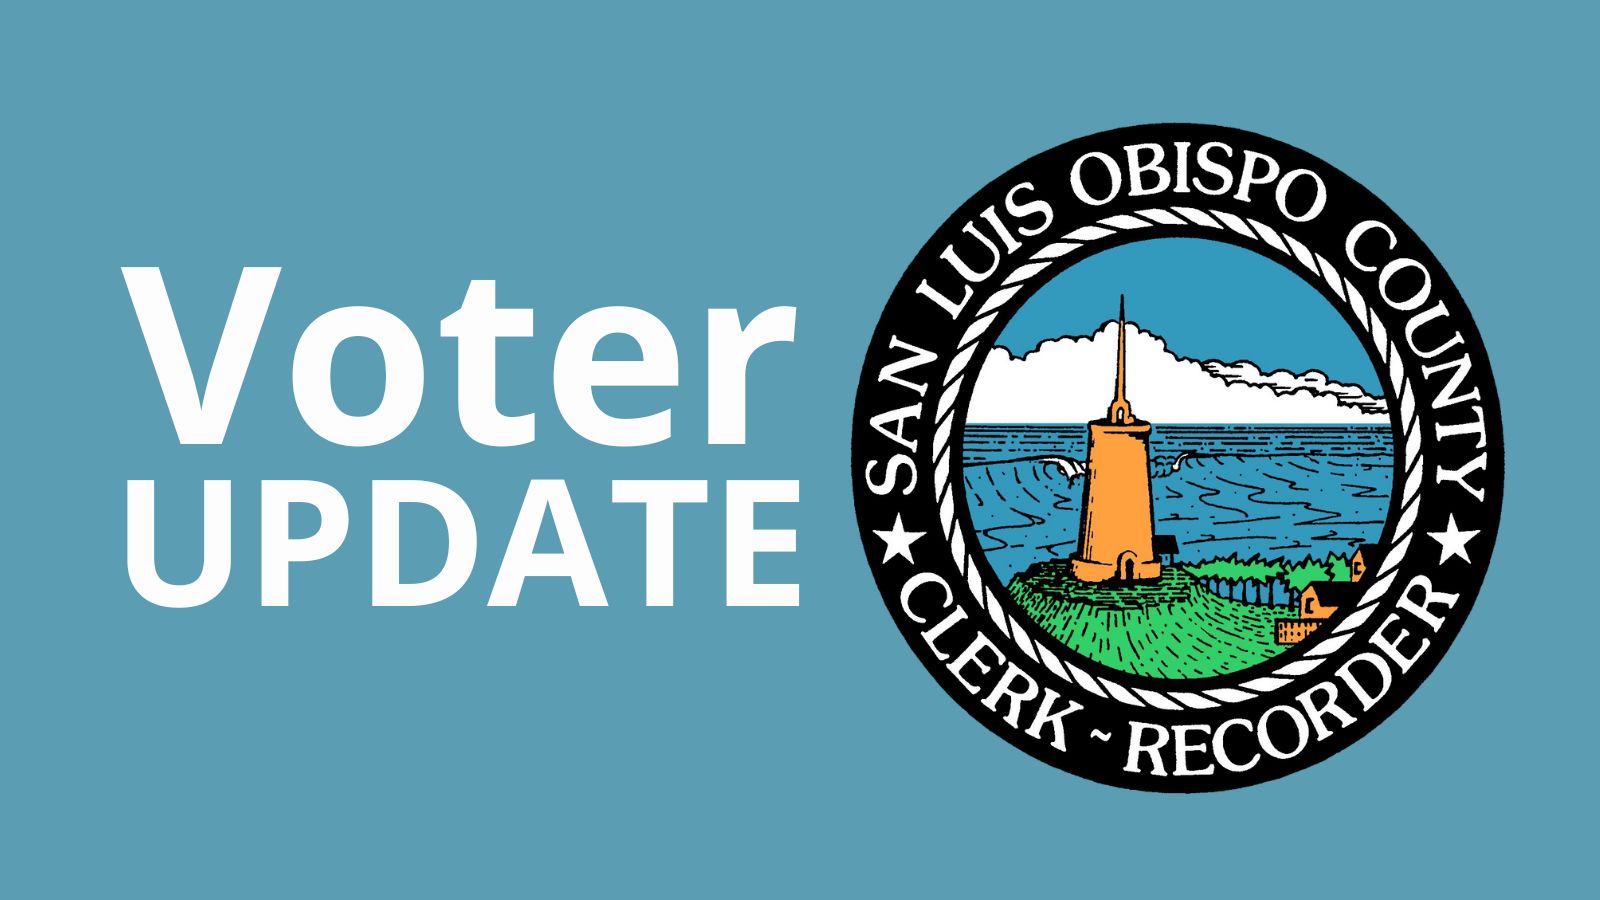 Text that says "Voter Update" next to the official Clerk-Recorder seal